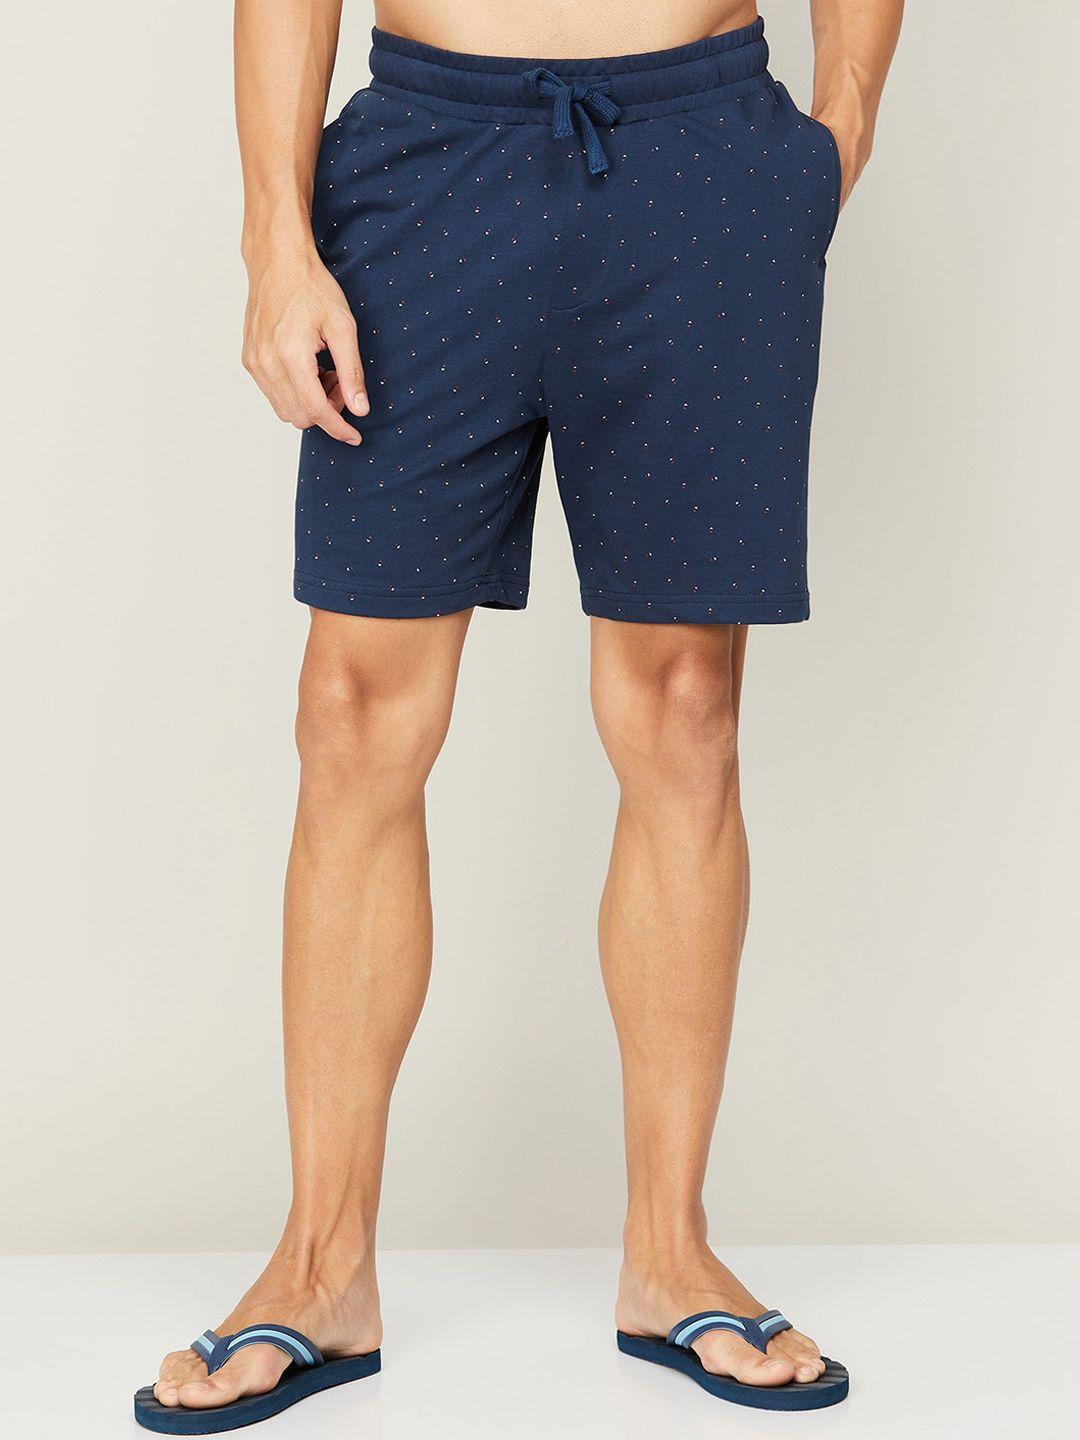 fame-forever-by-lifestyle-men-cotton-conversational-printed-shorts